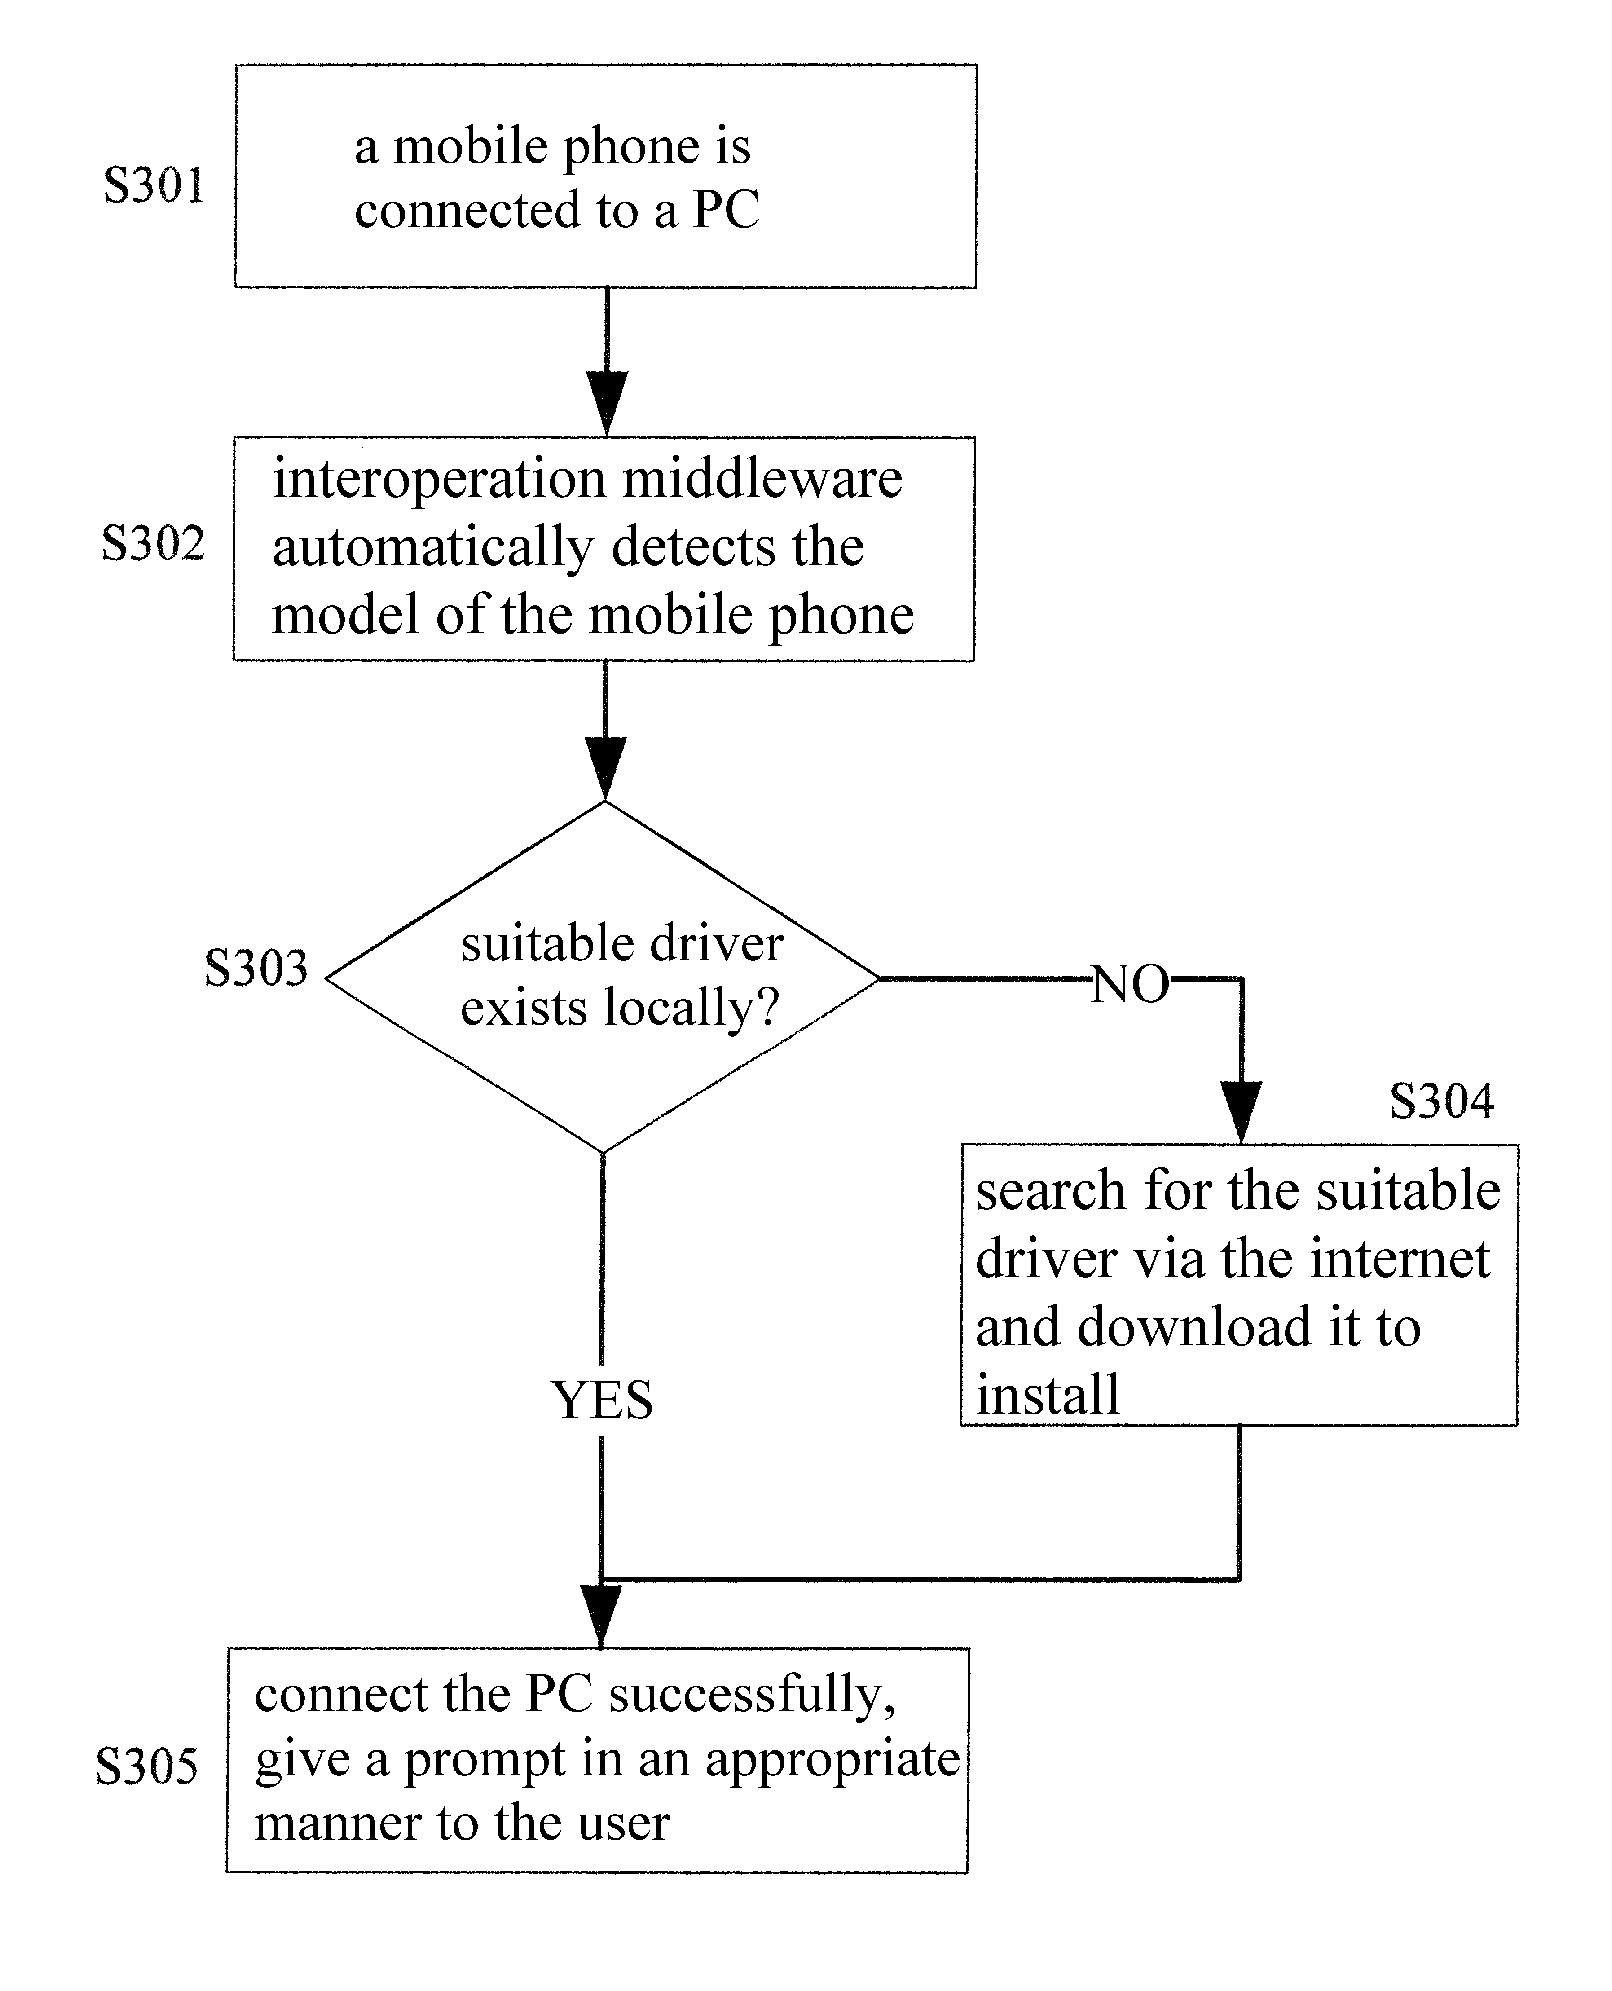 Method and system for interactive operation between mobile phone and PC based on a middleware